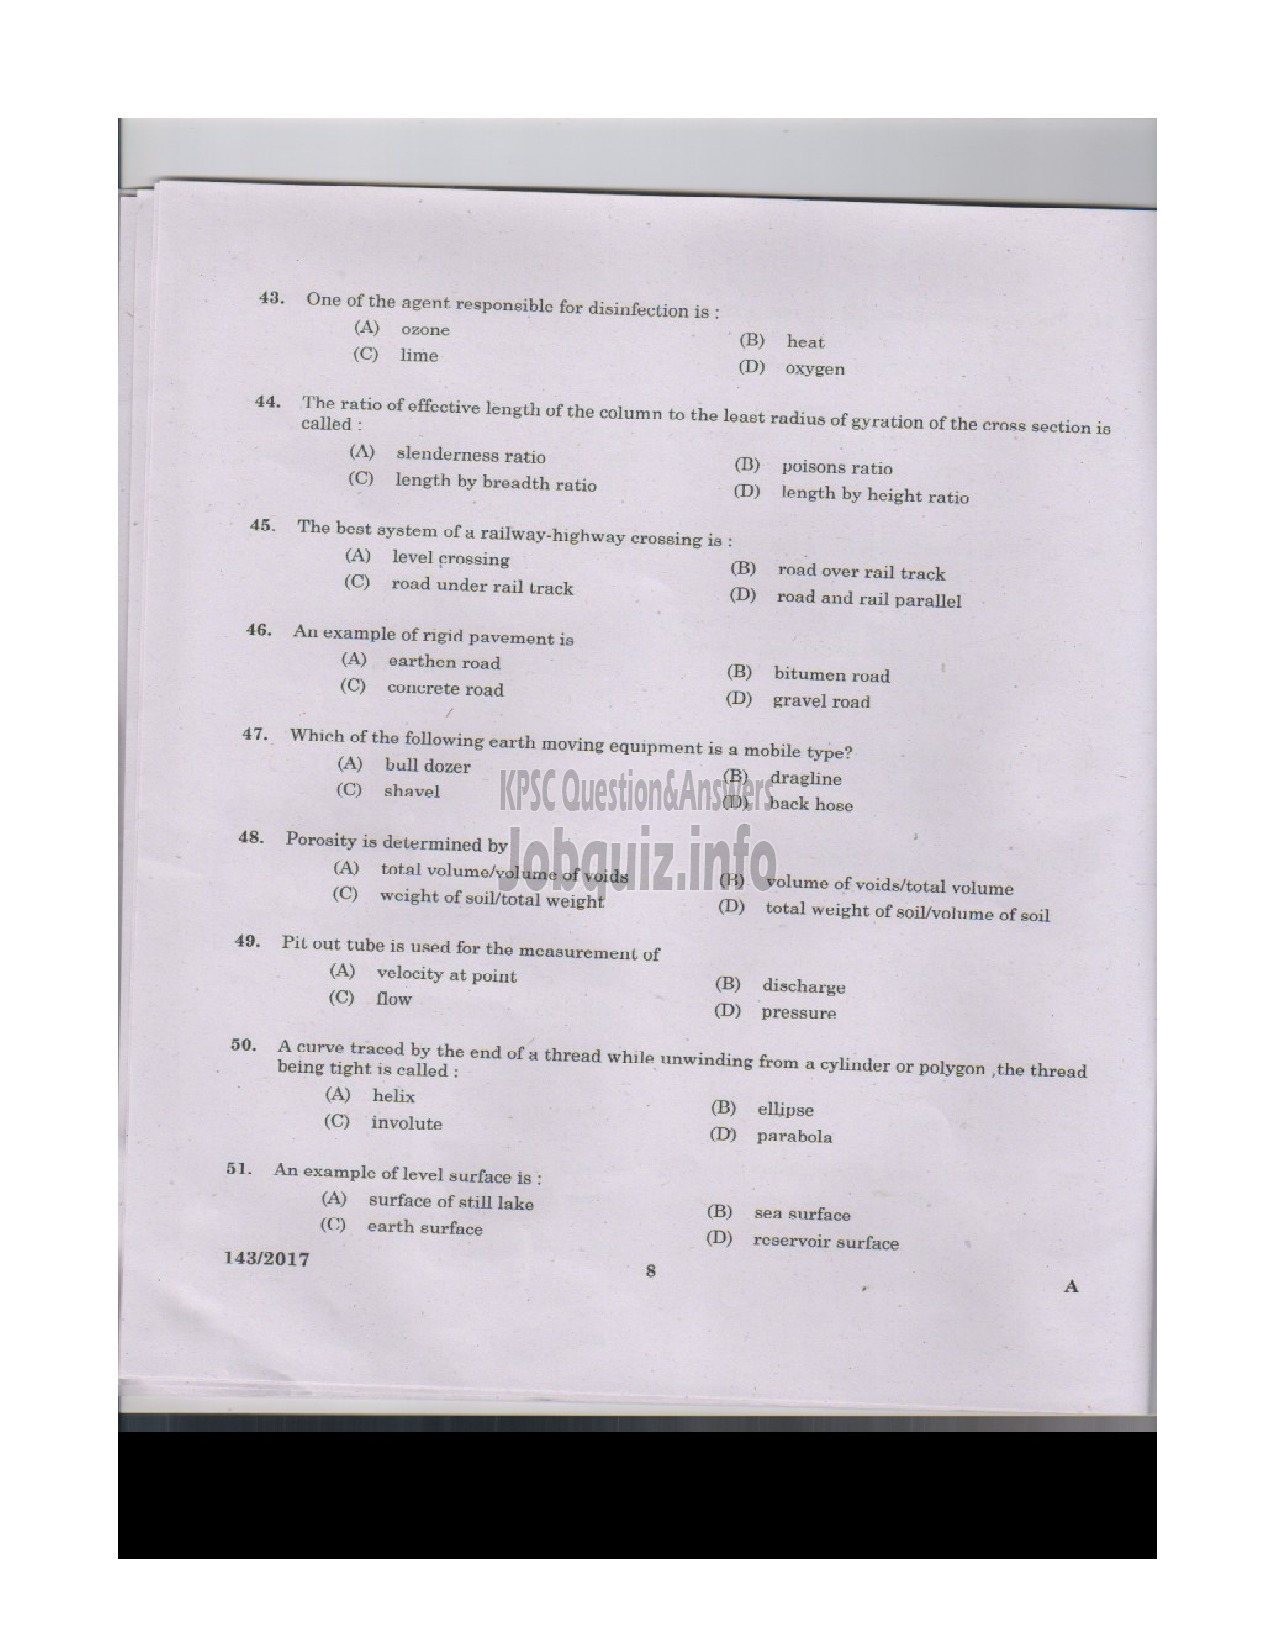 Kerala PSC Question Paper - VOCATIONAL INSTRUCTOR IN CIVIL CONSTRUCTION ANDMAINTENANCE VOCATIONAL HIGHER SECONDARY-7